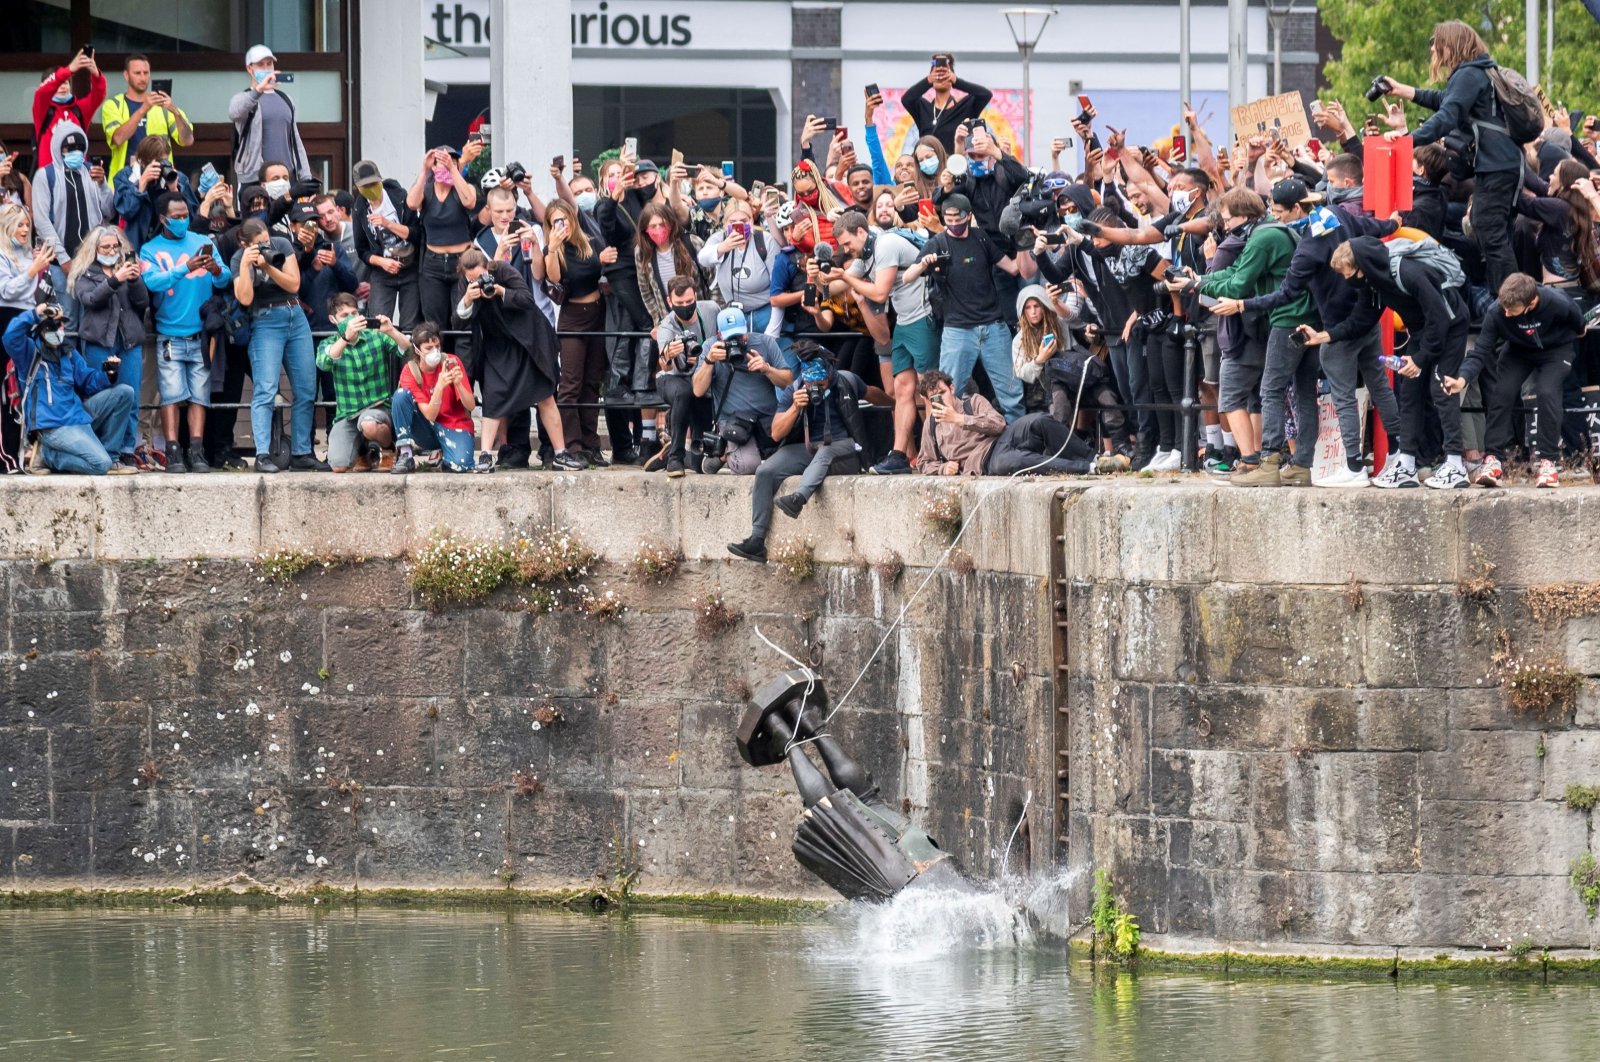 The statue of 17th-century slave trader Edward Colston falls into the water after protesters pulled it down and pushed off a dock, Bristol, June 7, 2020. (REUTERS Photo)